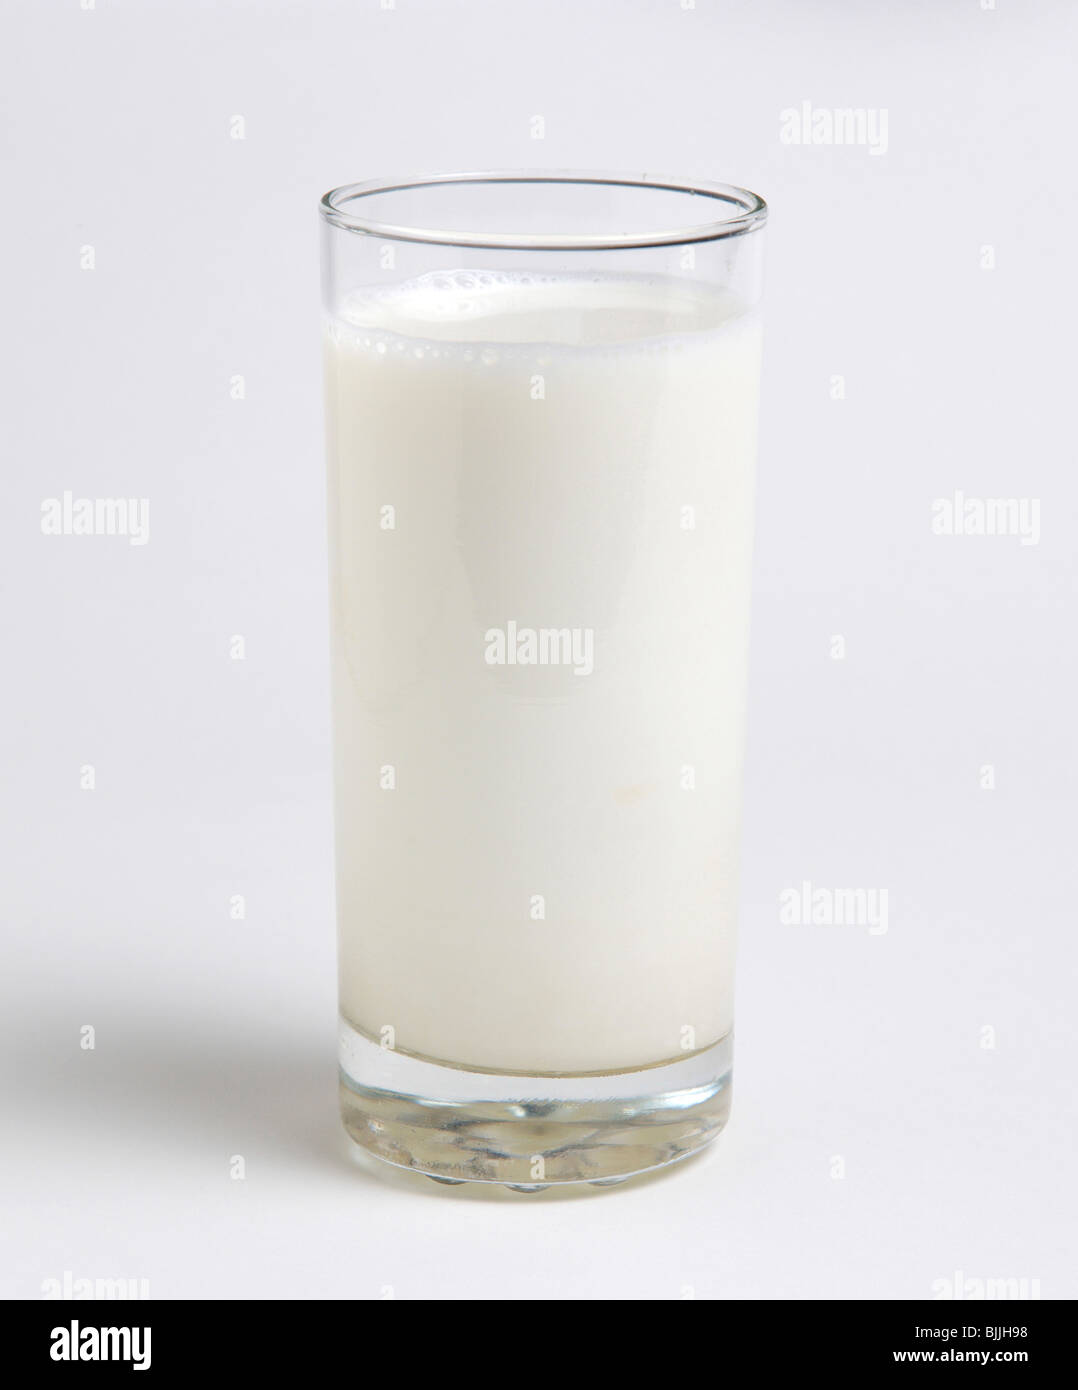 Drink, Milk, Tumbler glass of dairy milk against a white background Stock Photo